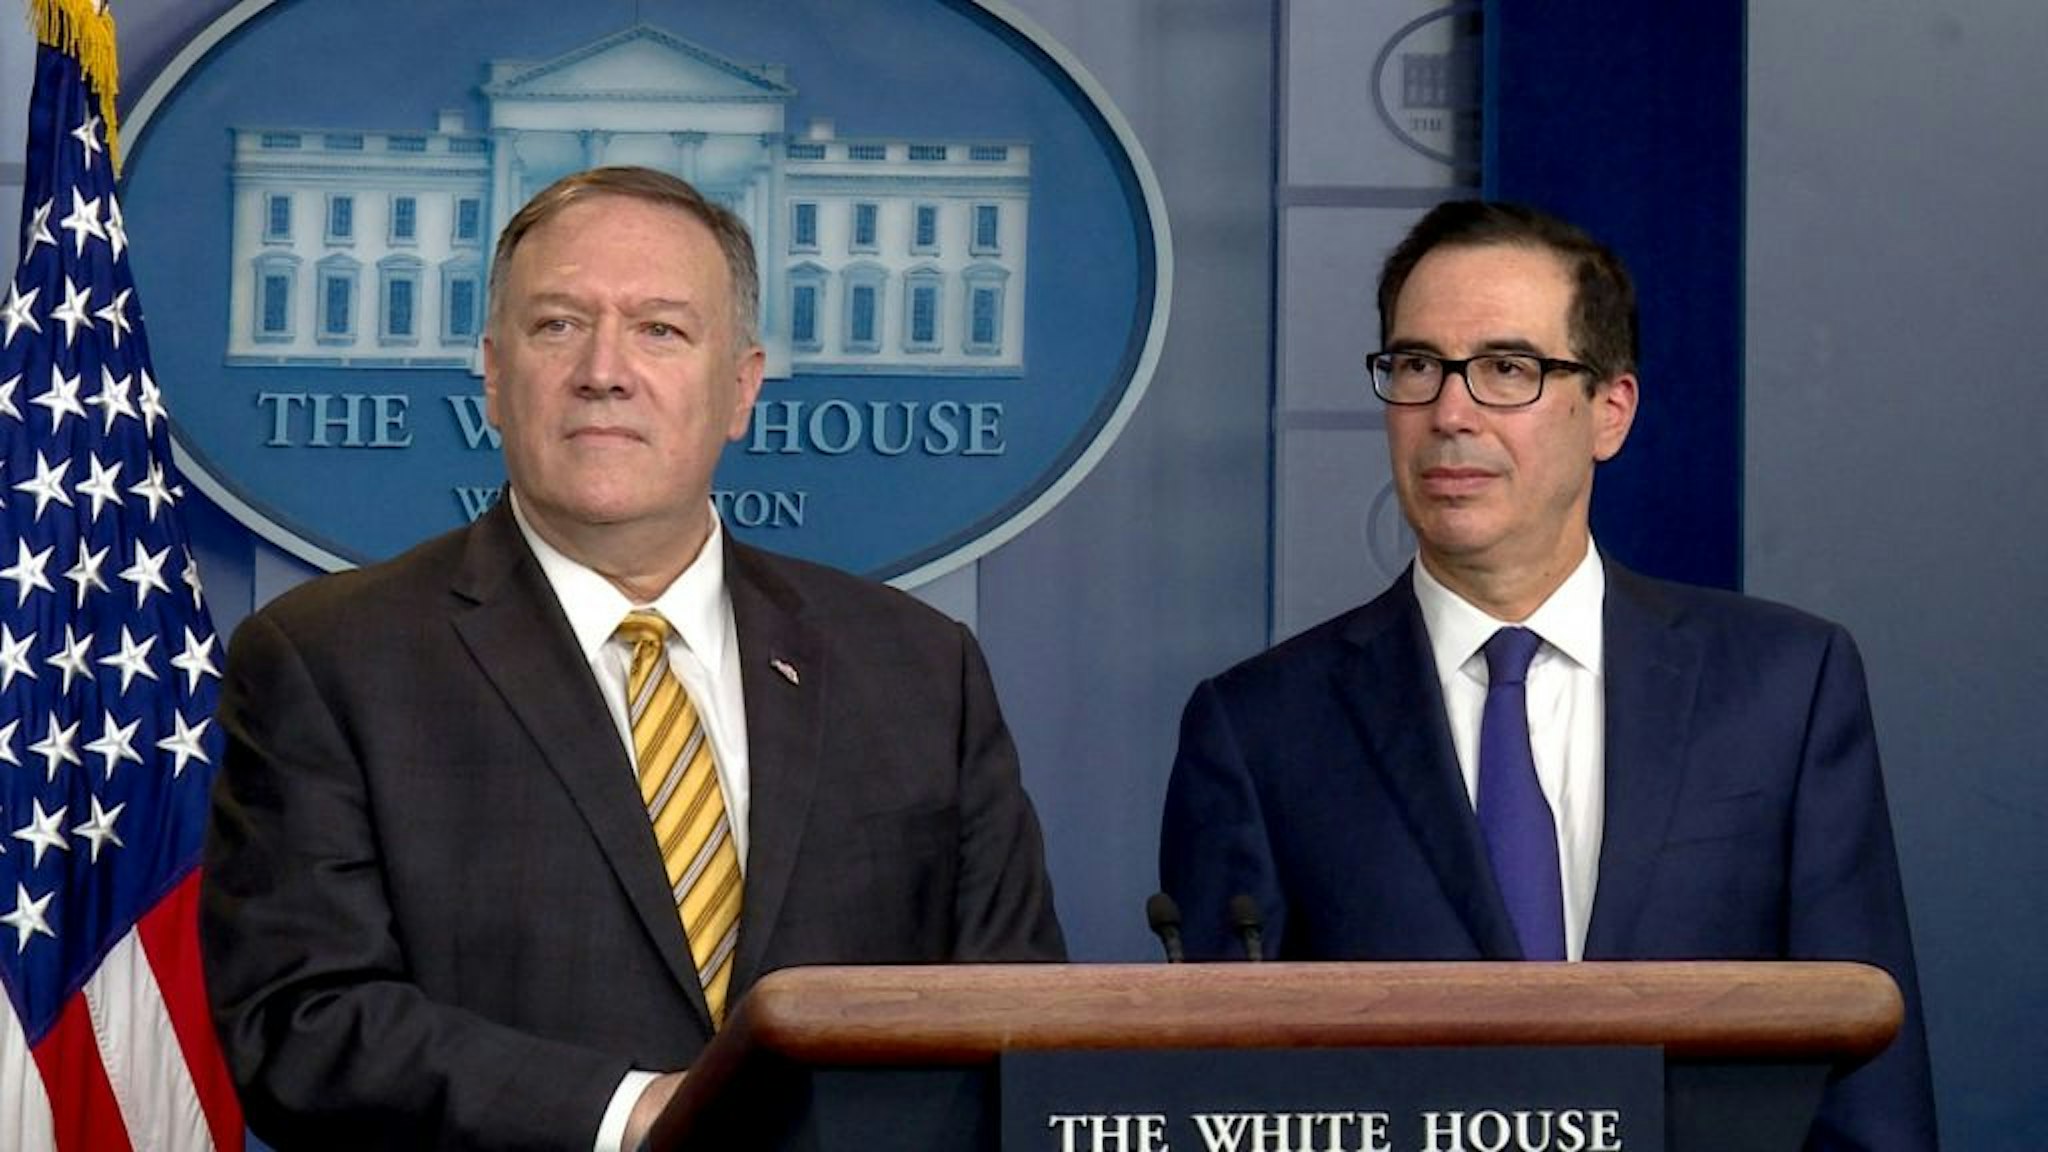 WASHINGTON, DC - SEPTEMBER 10: U.S. Secretary of State Mike Pompeo (L) and Treasury Secretary Steven Mnuchin (R) brief reporters in the James Brady briefing room at the White House on September 10, 2019 in Washington, DC, United States